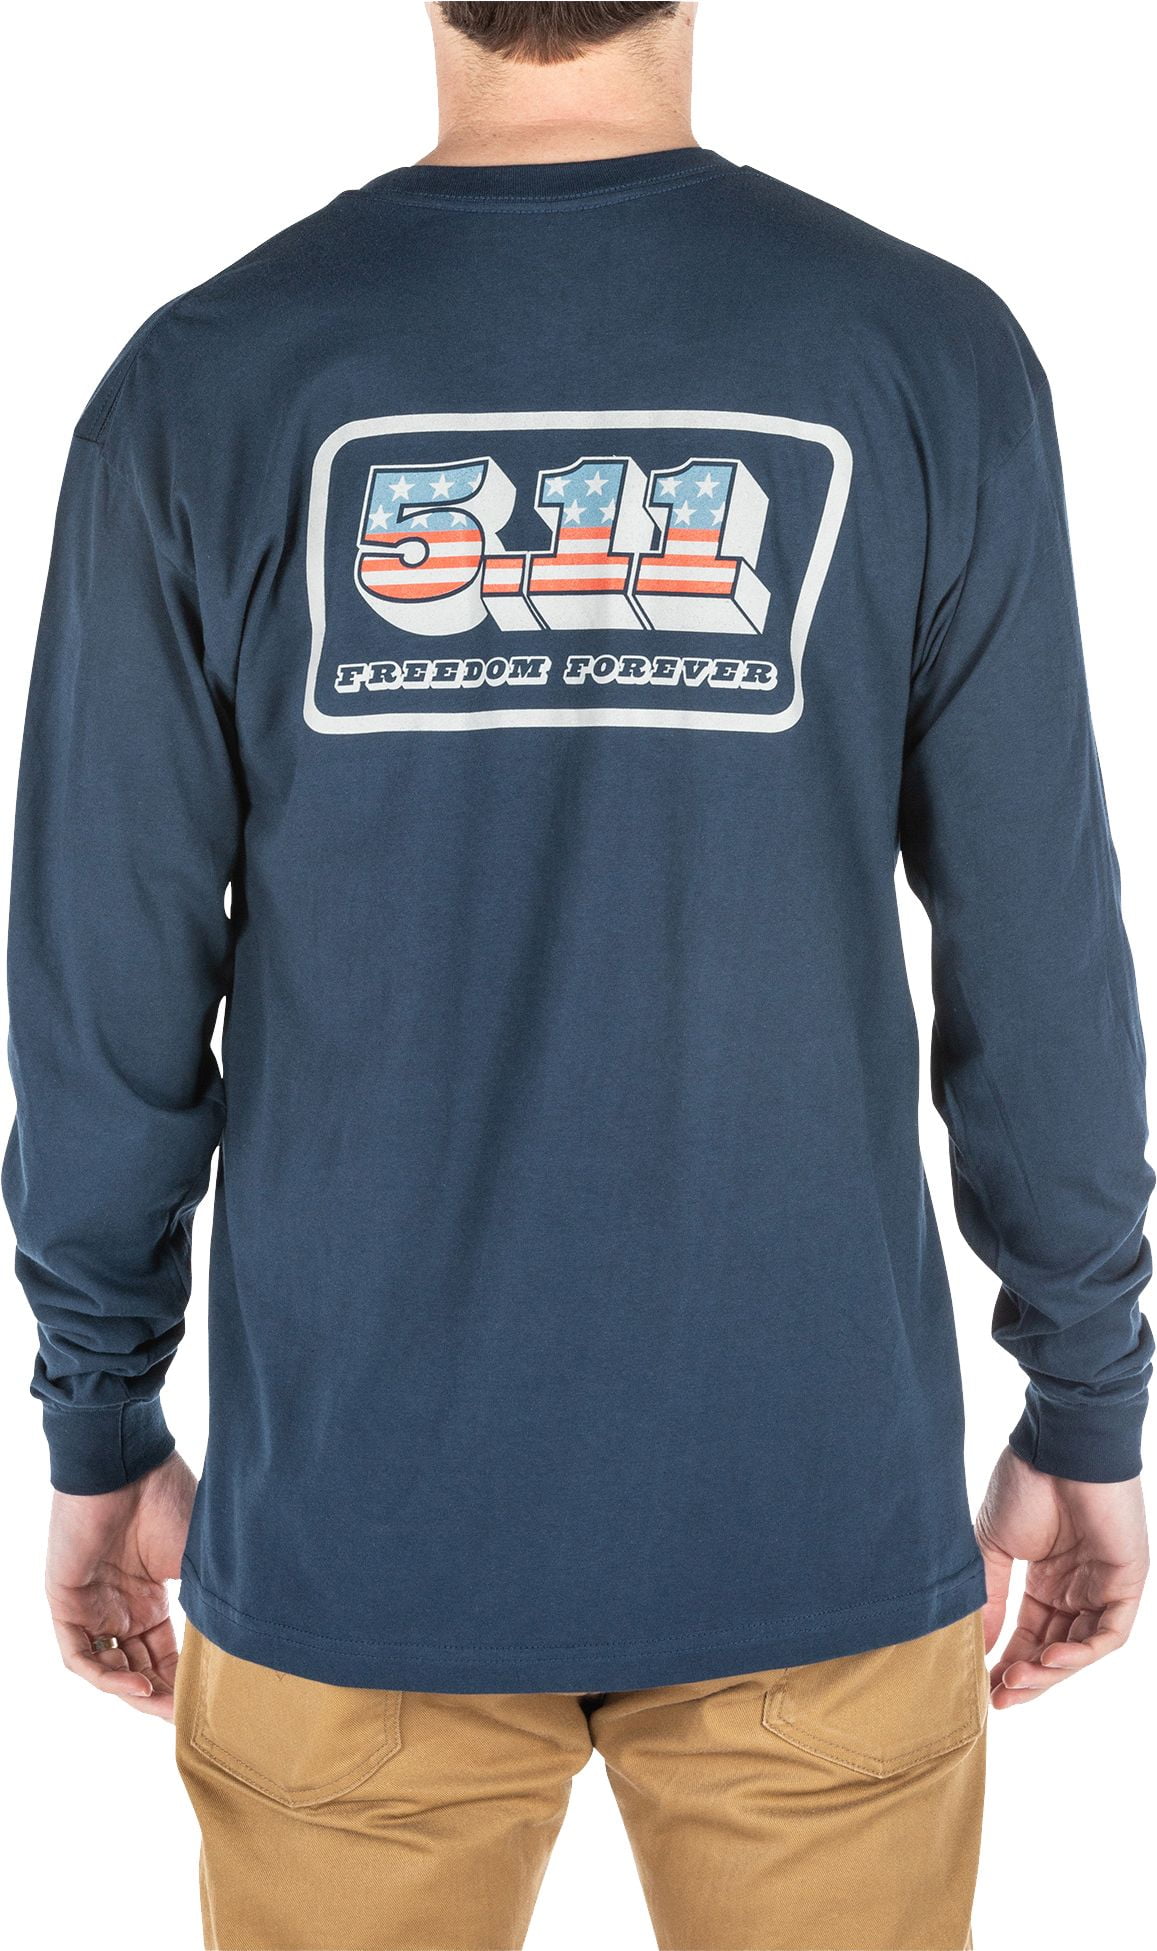 5.11 Tactical - Men's 5.11 Tactical Freedom Forever Long Sleeve T-Shirt ...